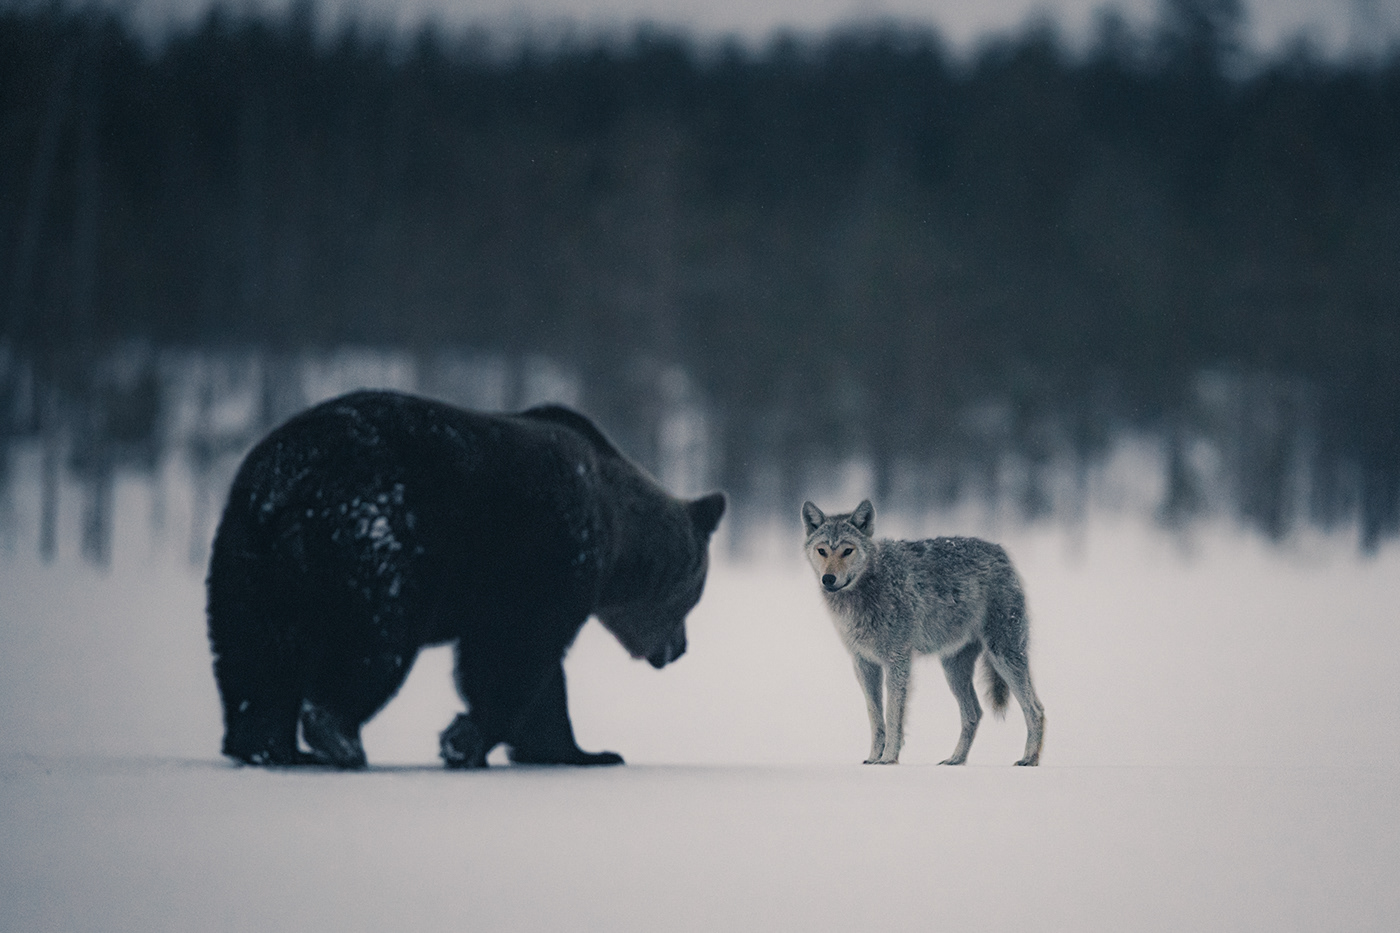 Bear and wolf meet in a snowy wilderness